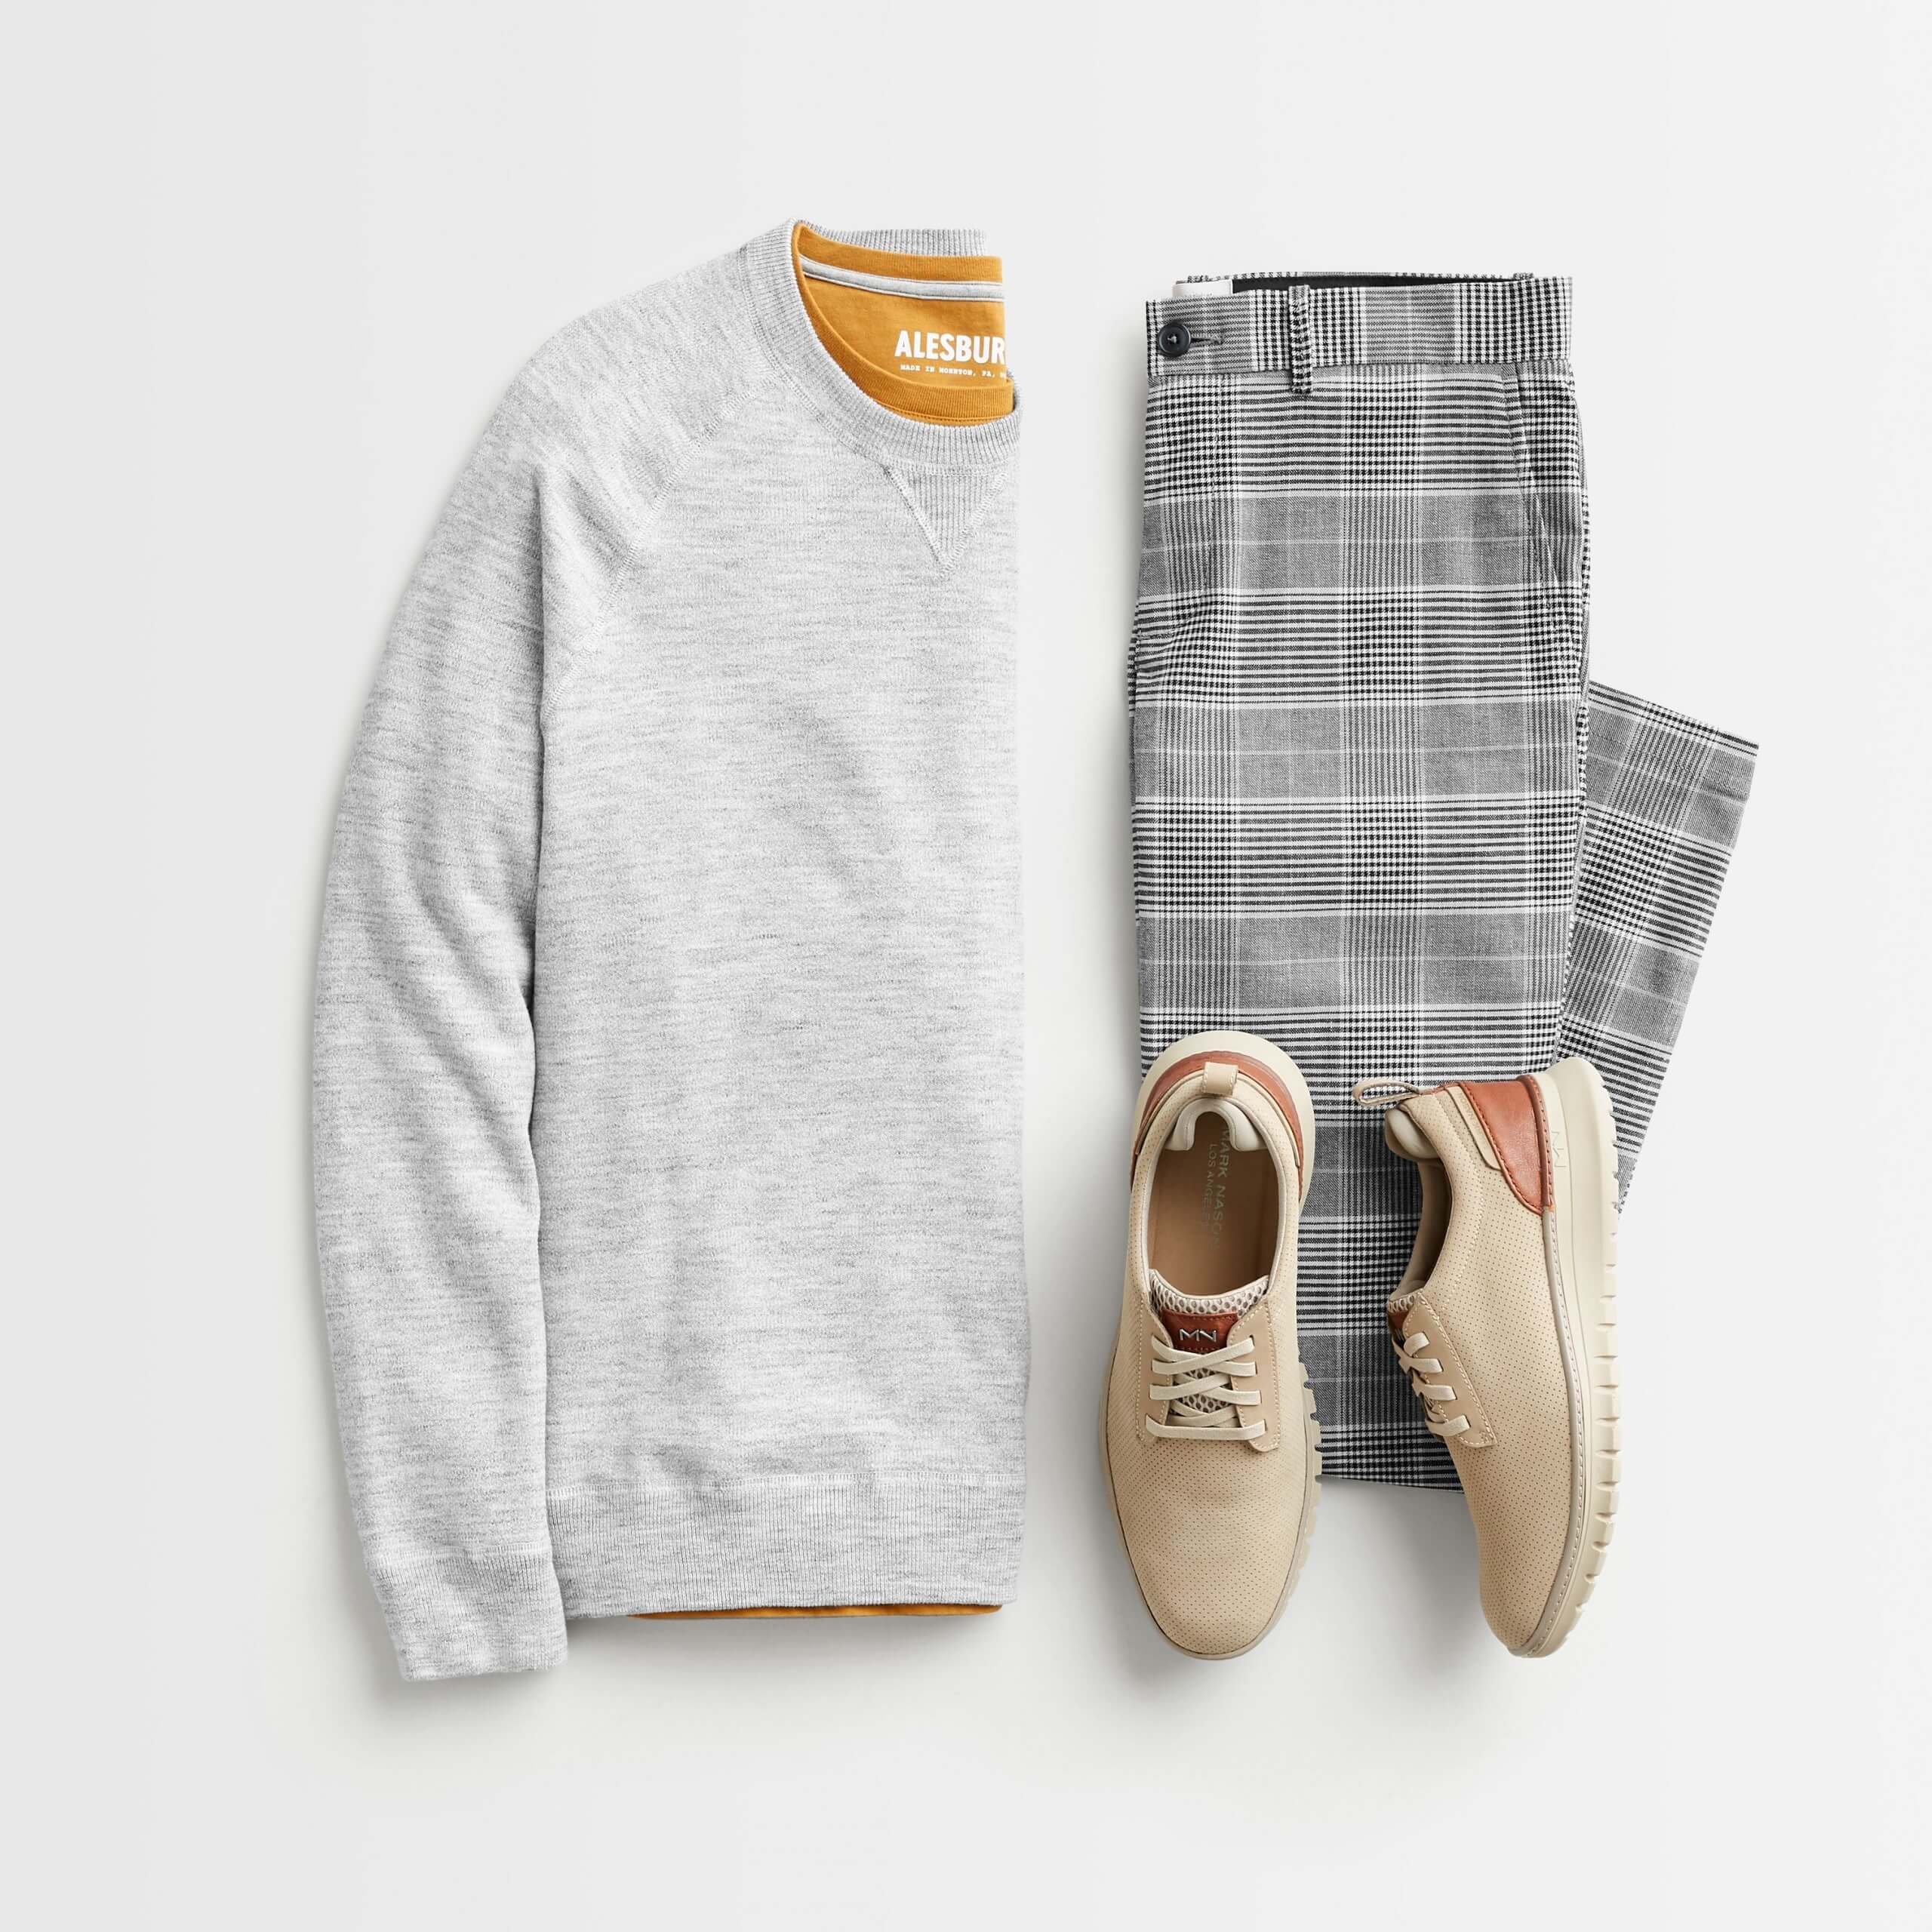 Stitch Fix men’s outfit laydown featuring grey sweatshirt over mustard shirt, plaid grey pants and beige shoes.